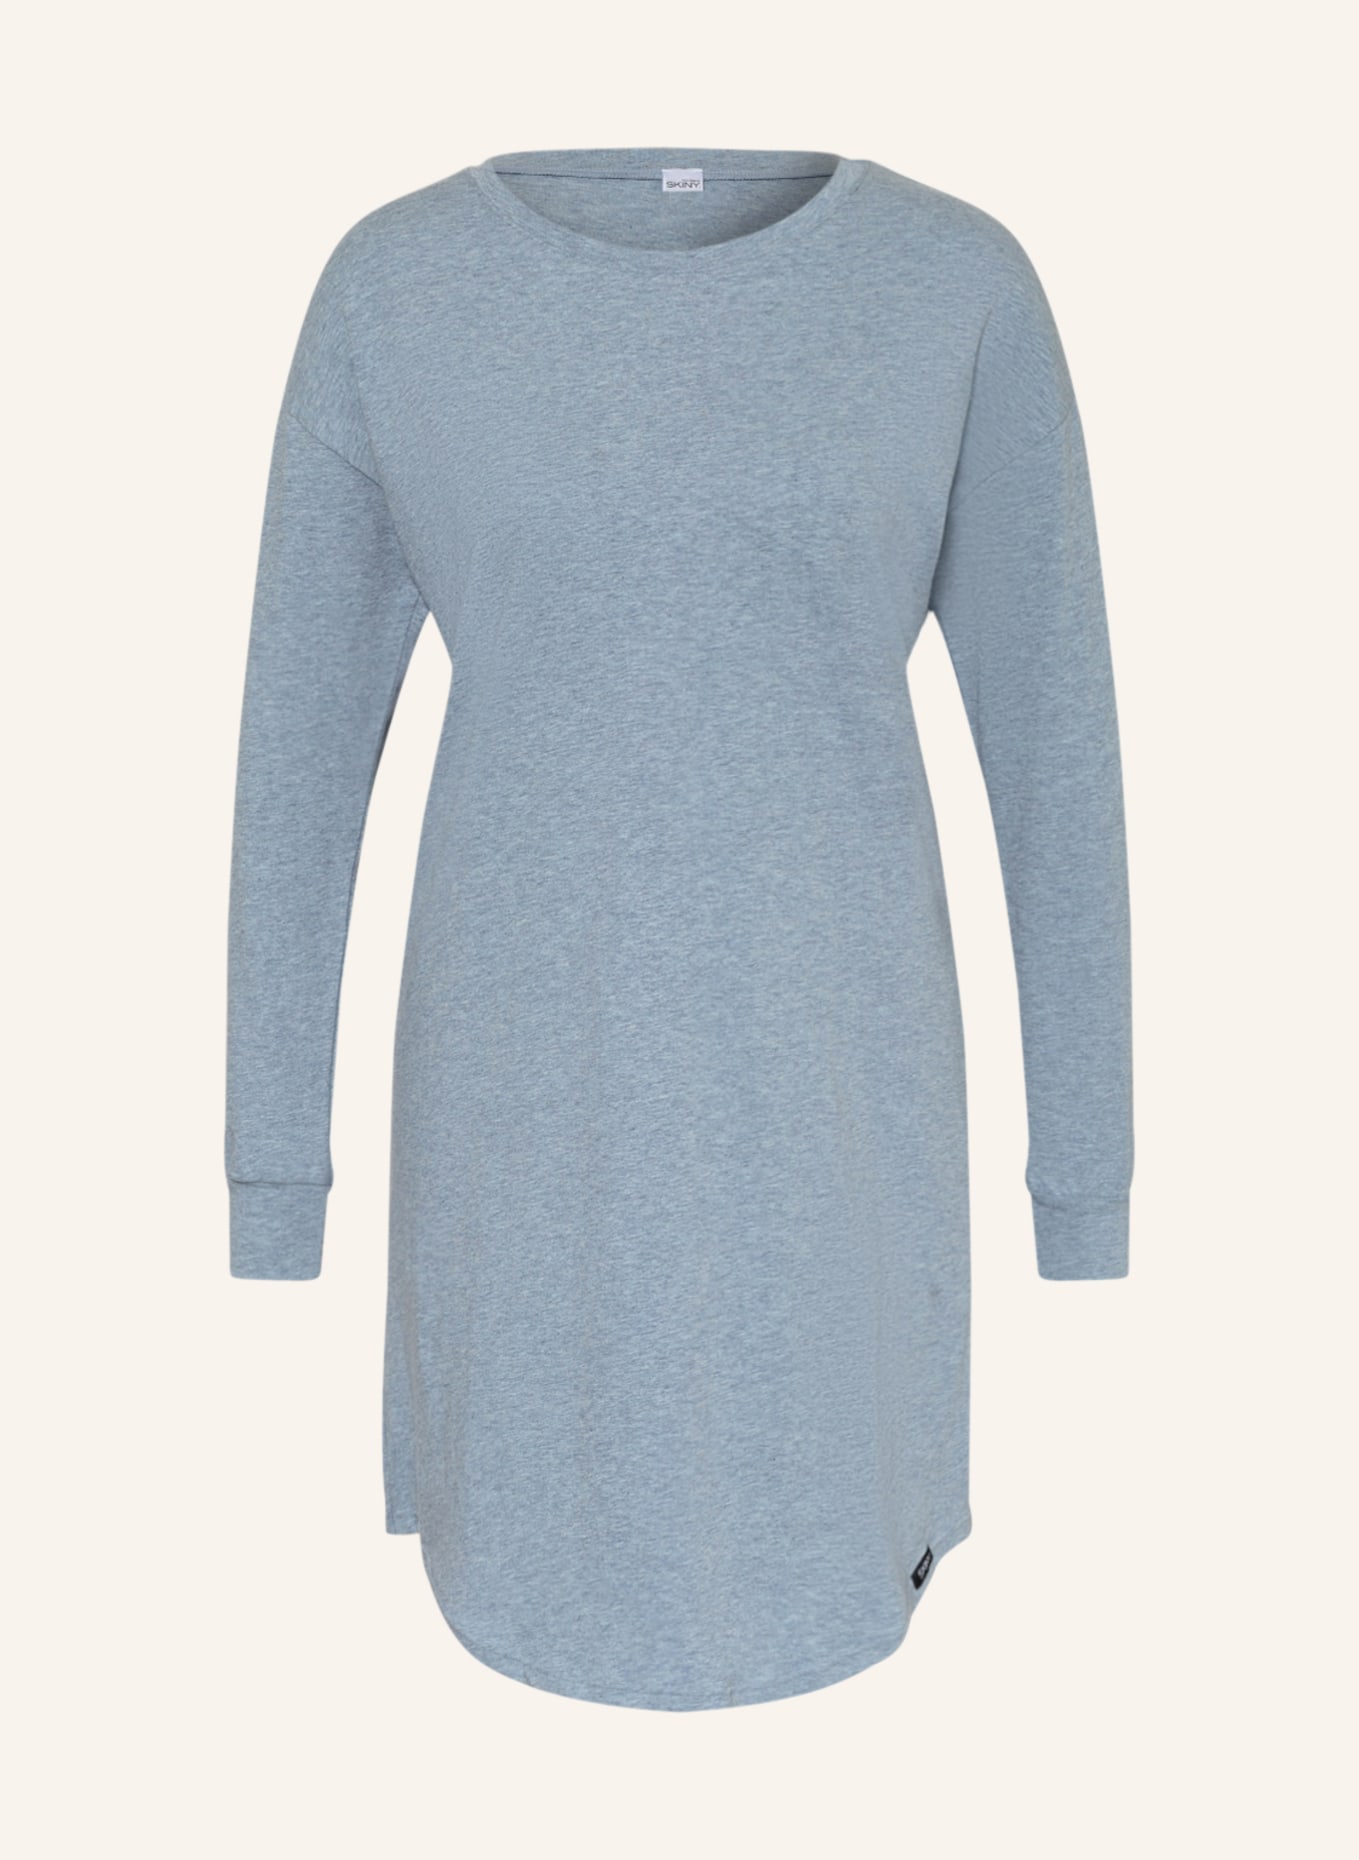 blue gray MATCH Skiny Nightgown & MIX EVERY IN in NIGHT